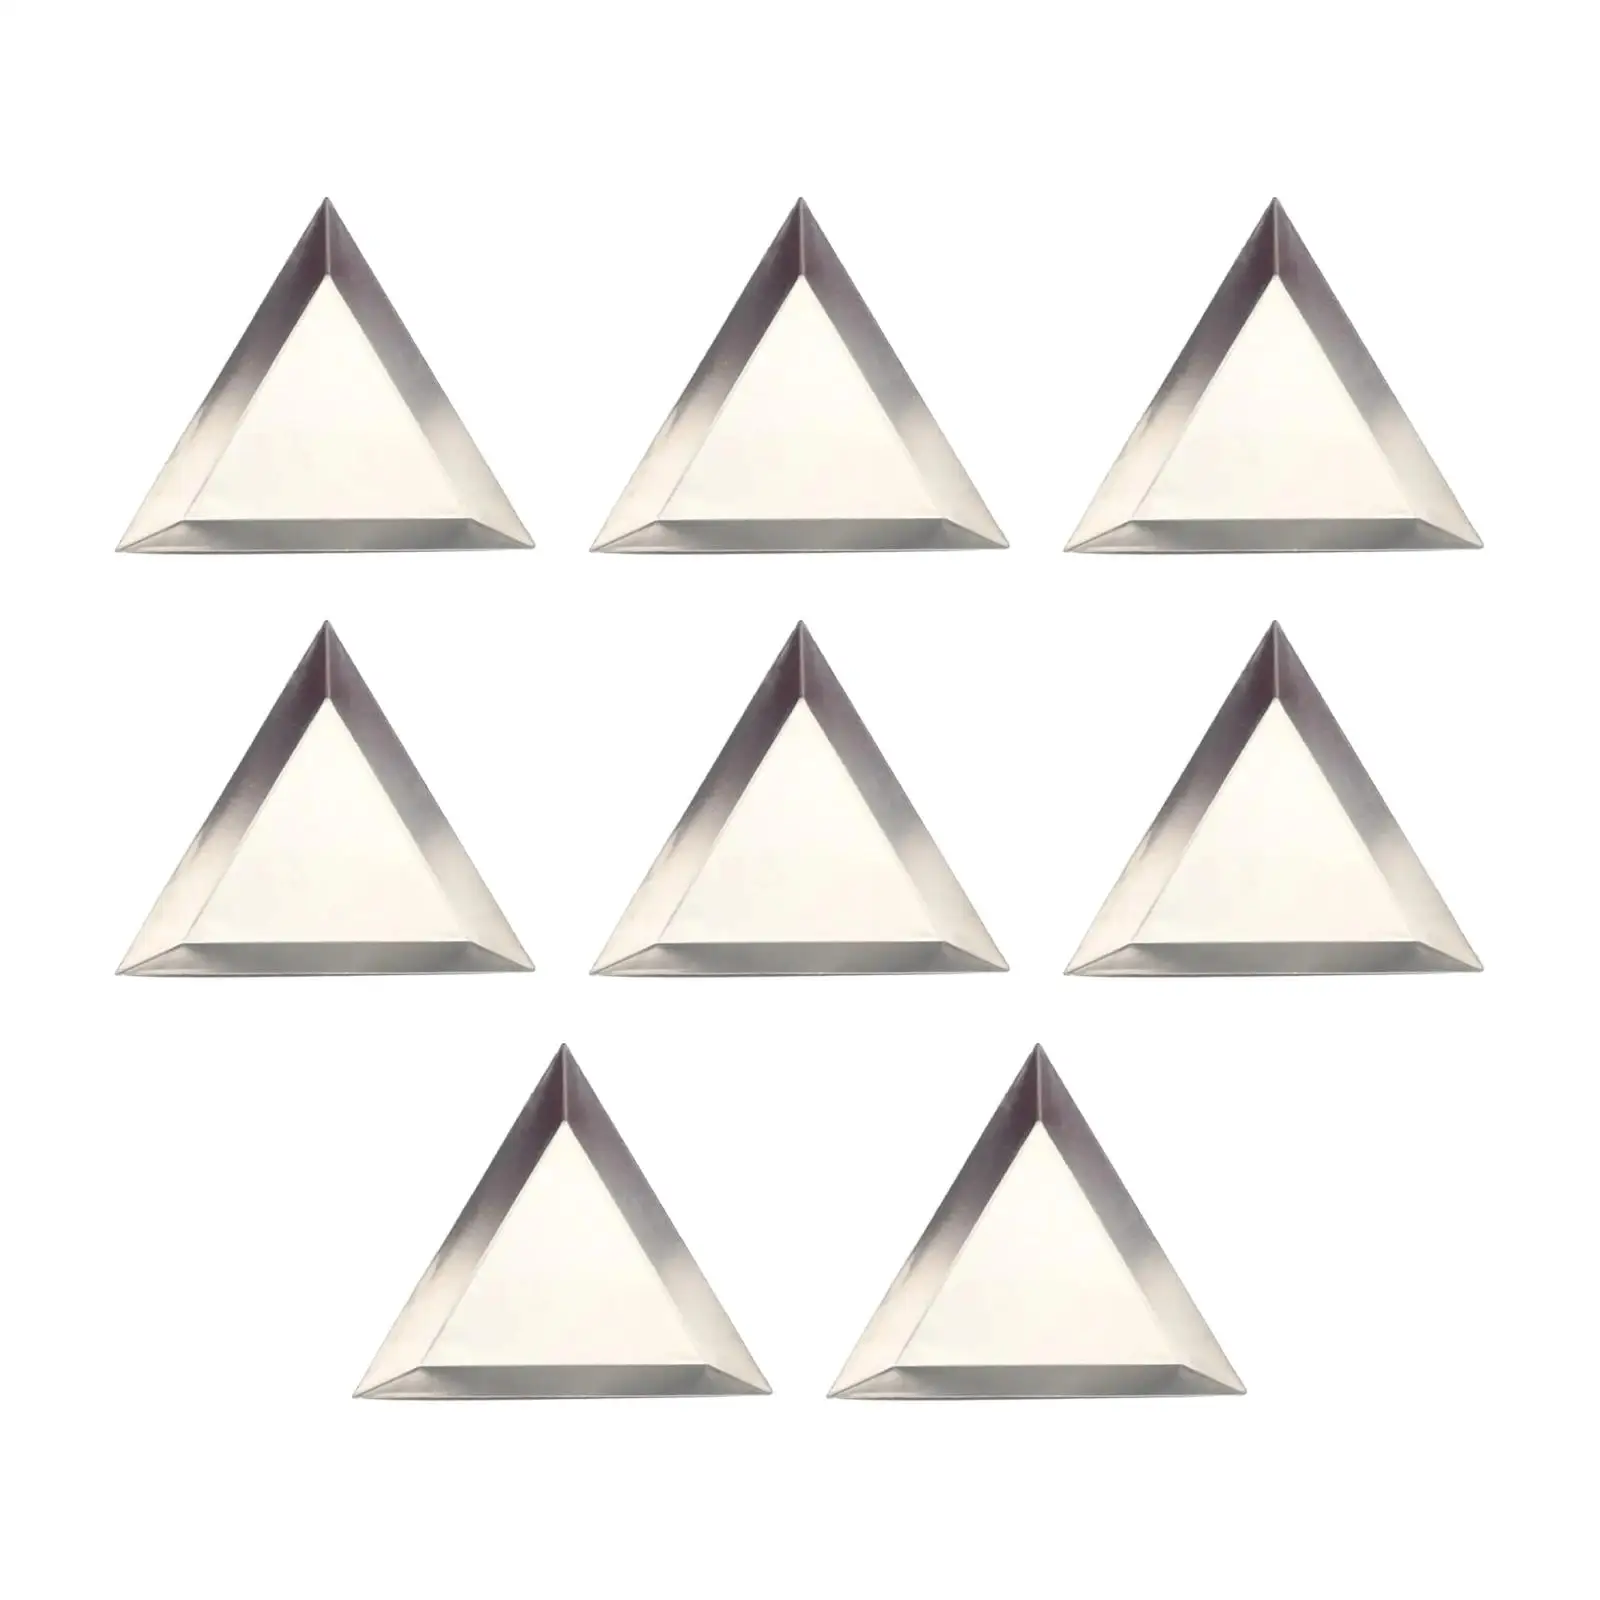 8 Pieces Triangle Bead Sorting Trays Triangle Sorting Storage Plates Art Tray for Painting Rhinestones Nail Art Jewelery Making